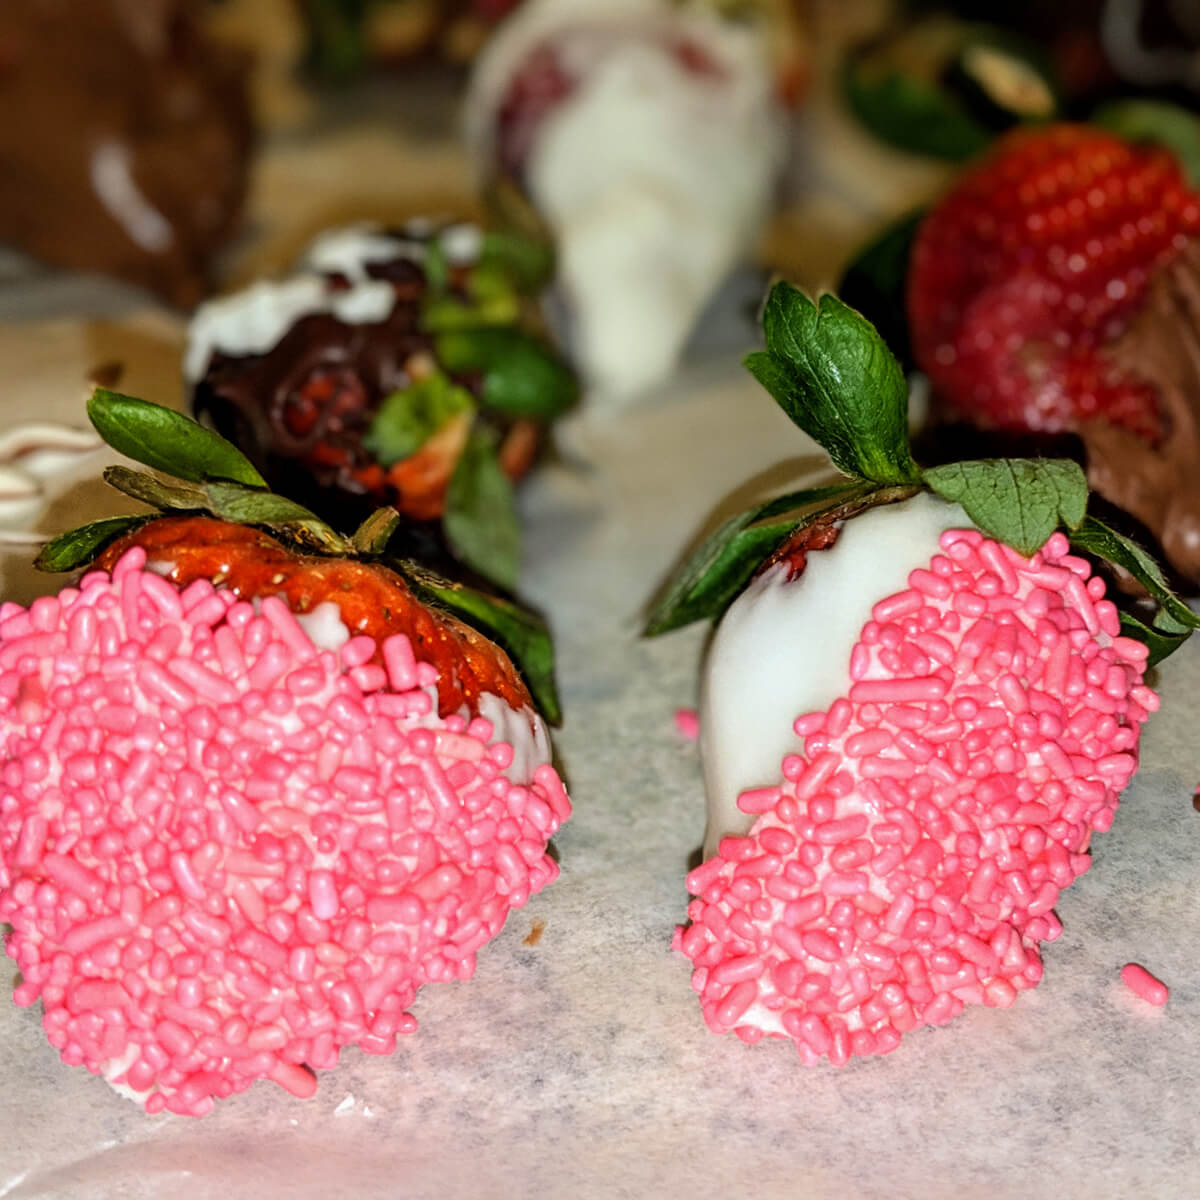 Chocolate-Covered Strawberries with pink jimmies sprinkles for decoration